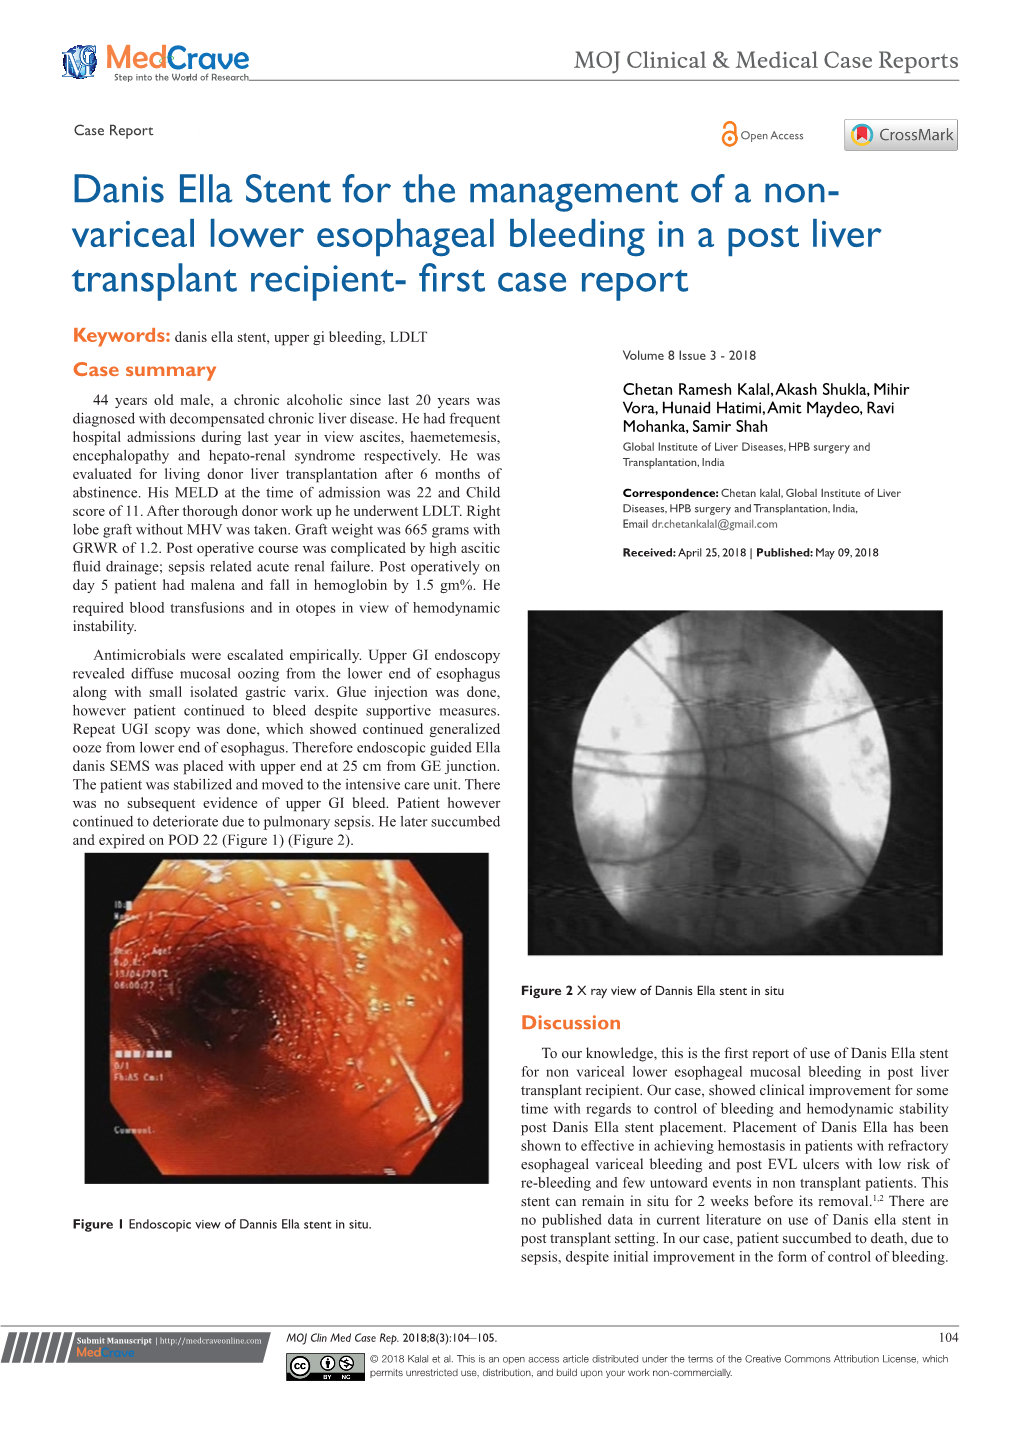 Danis Ella Stent for the Management of a Non-Variceal Lower Esophageal Bleeding in a Post Liver 105 Transplant Recipient- First Case Report ©2018 Kalal Et Al